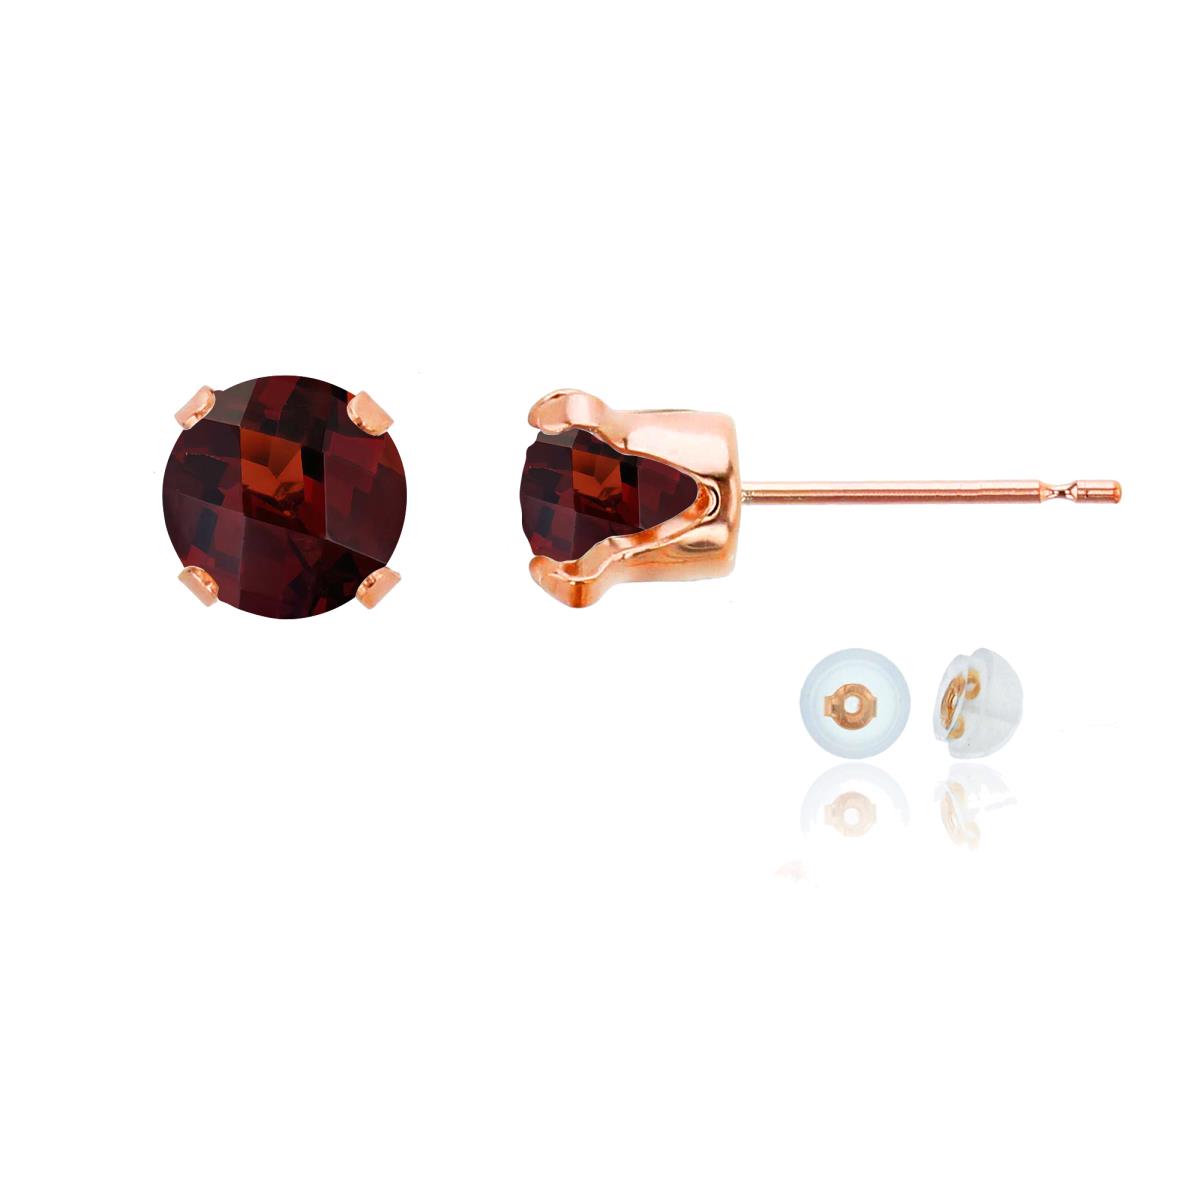 10K Rose Gold 6mm Round Garnet Stud Earring with Silicone Back